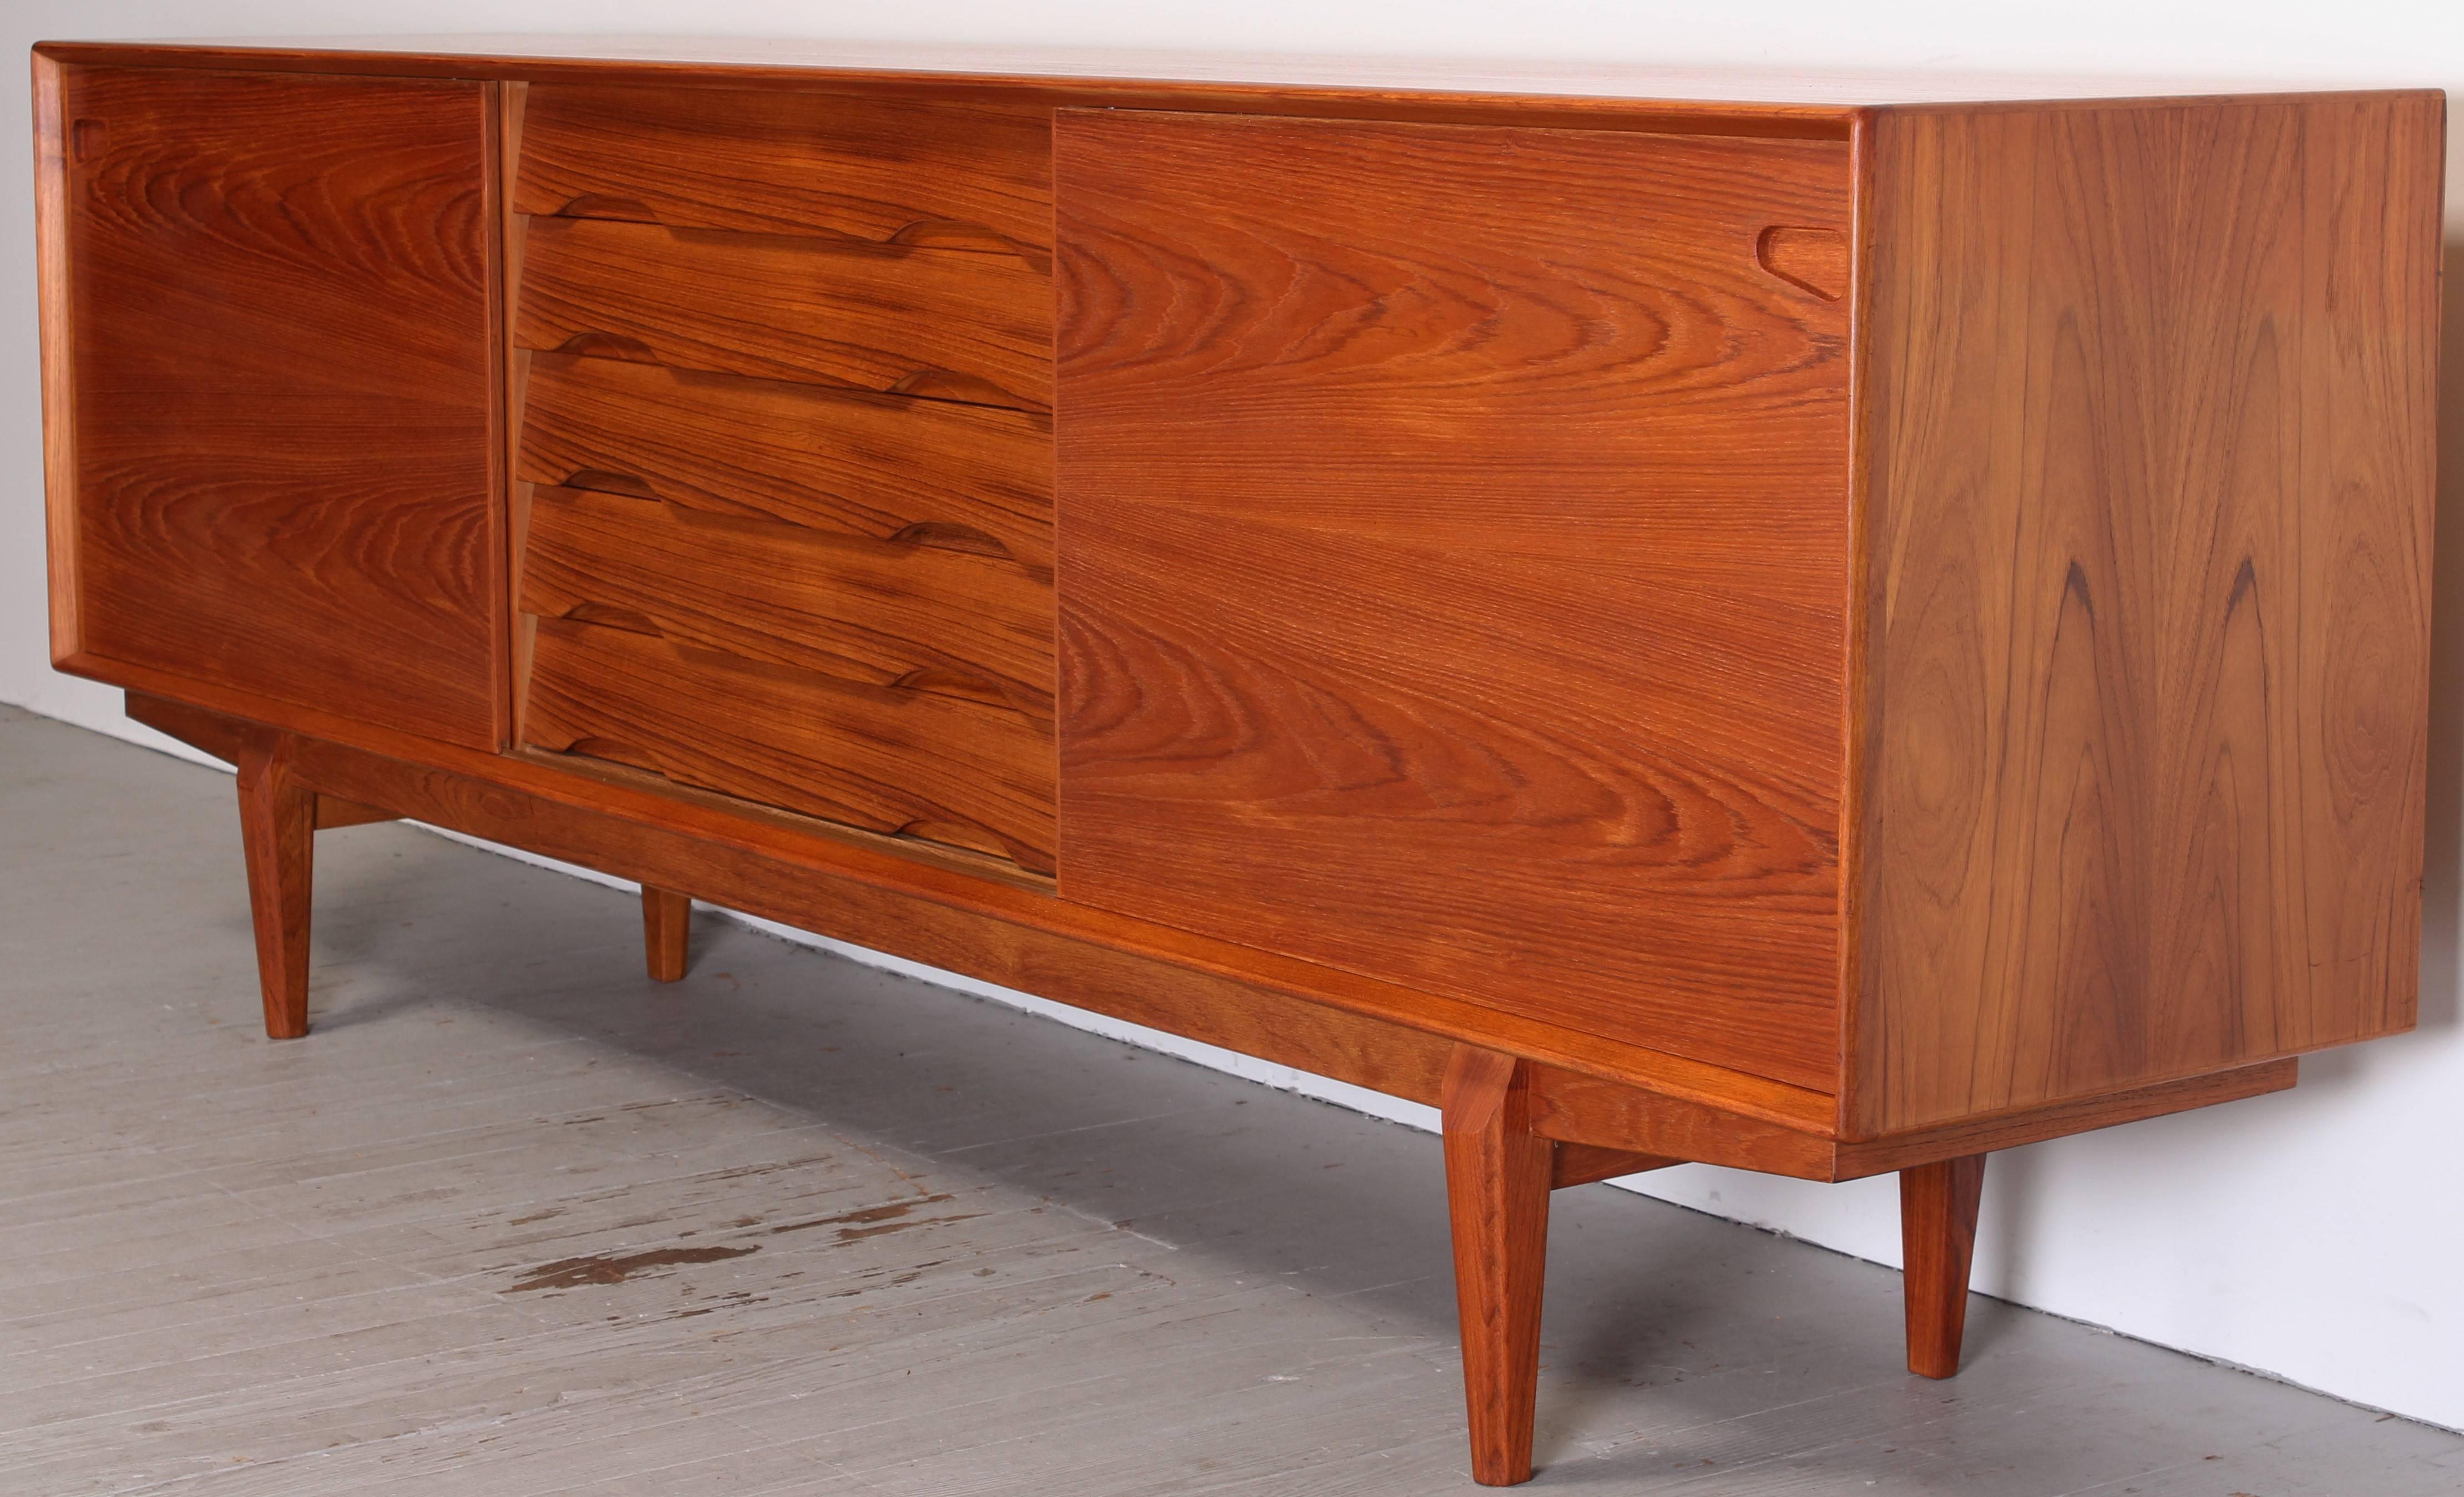 Teak credenza made by Dyrlund of Denmark. Two sliding doors and five drawers, top drawer has green felt lining. Adjustable shelves, use none or adjust the three included shelves as needed. Dyrlund label affixed inside cabinet. Pair are available. 